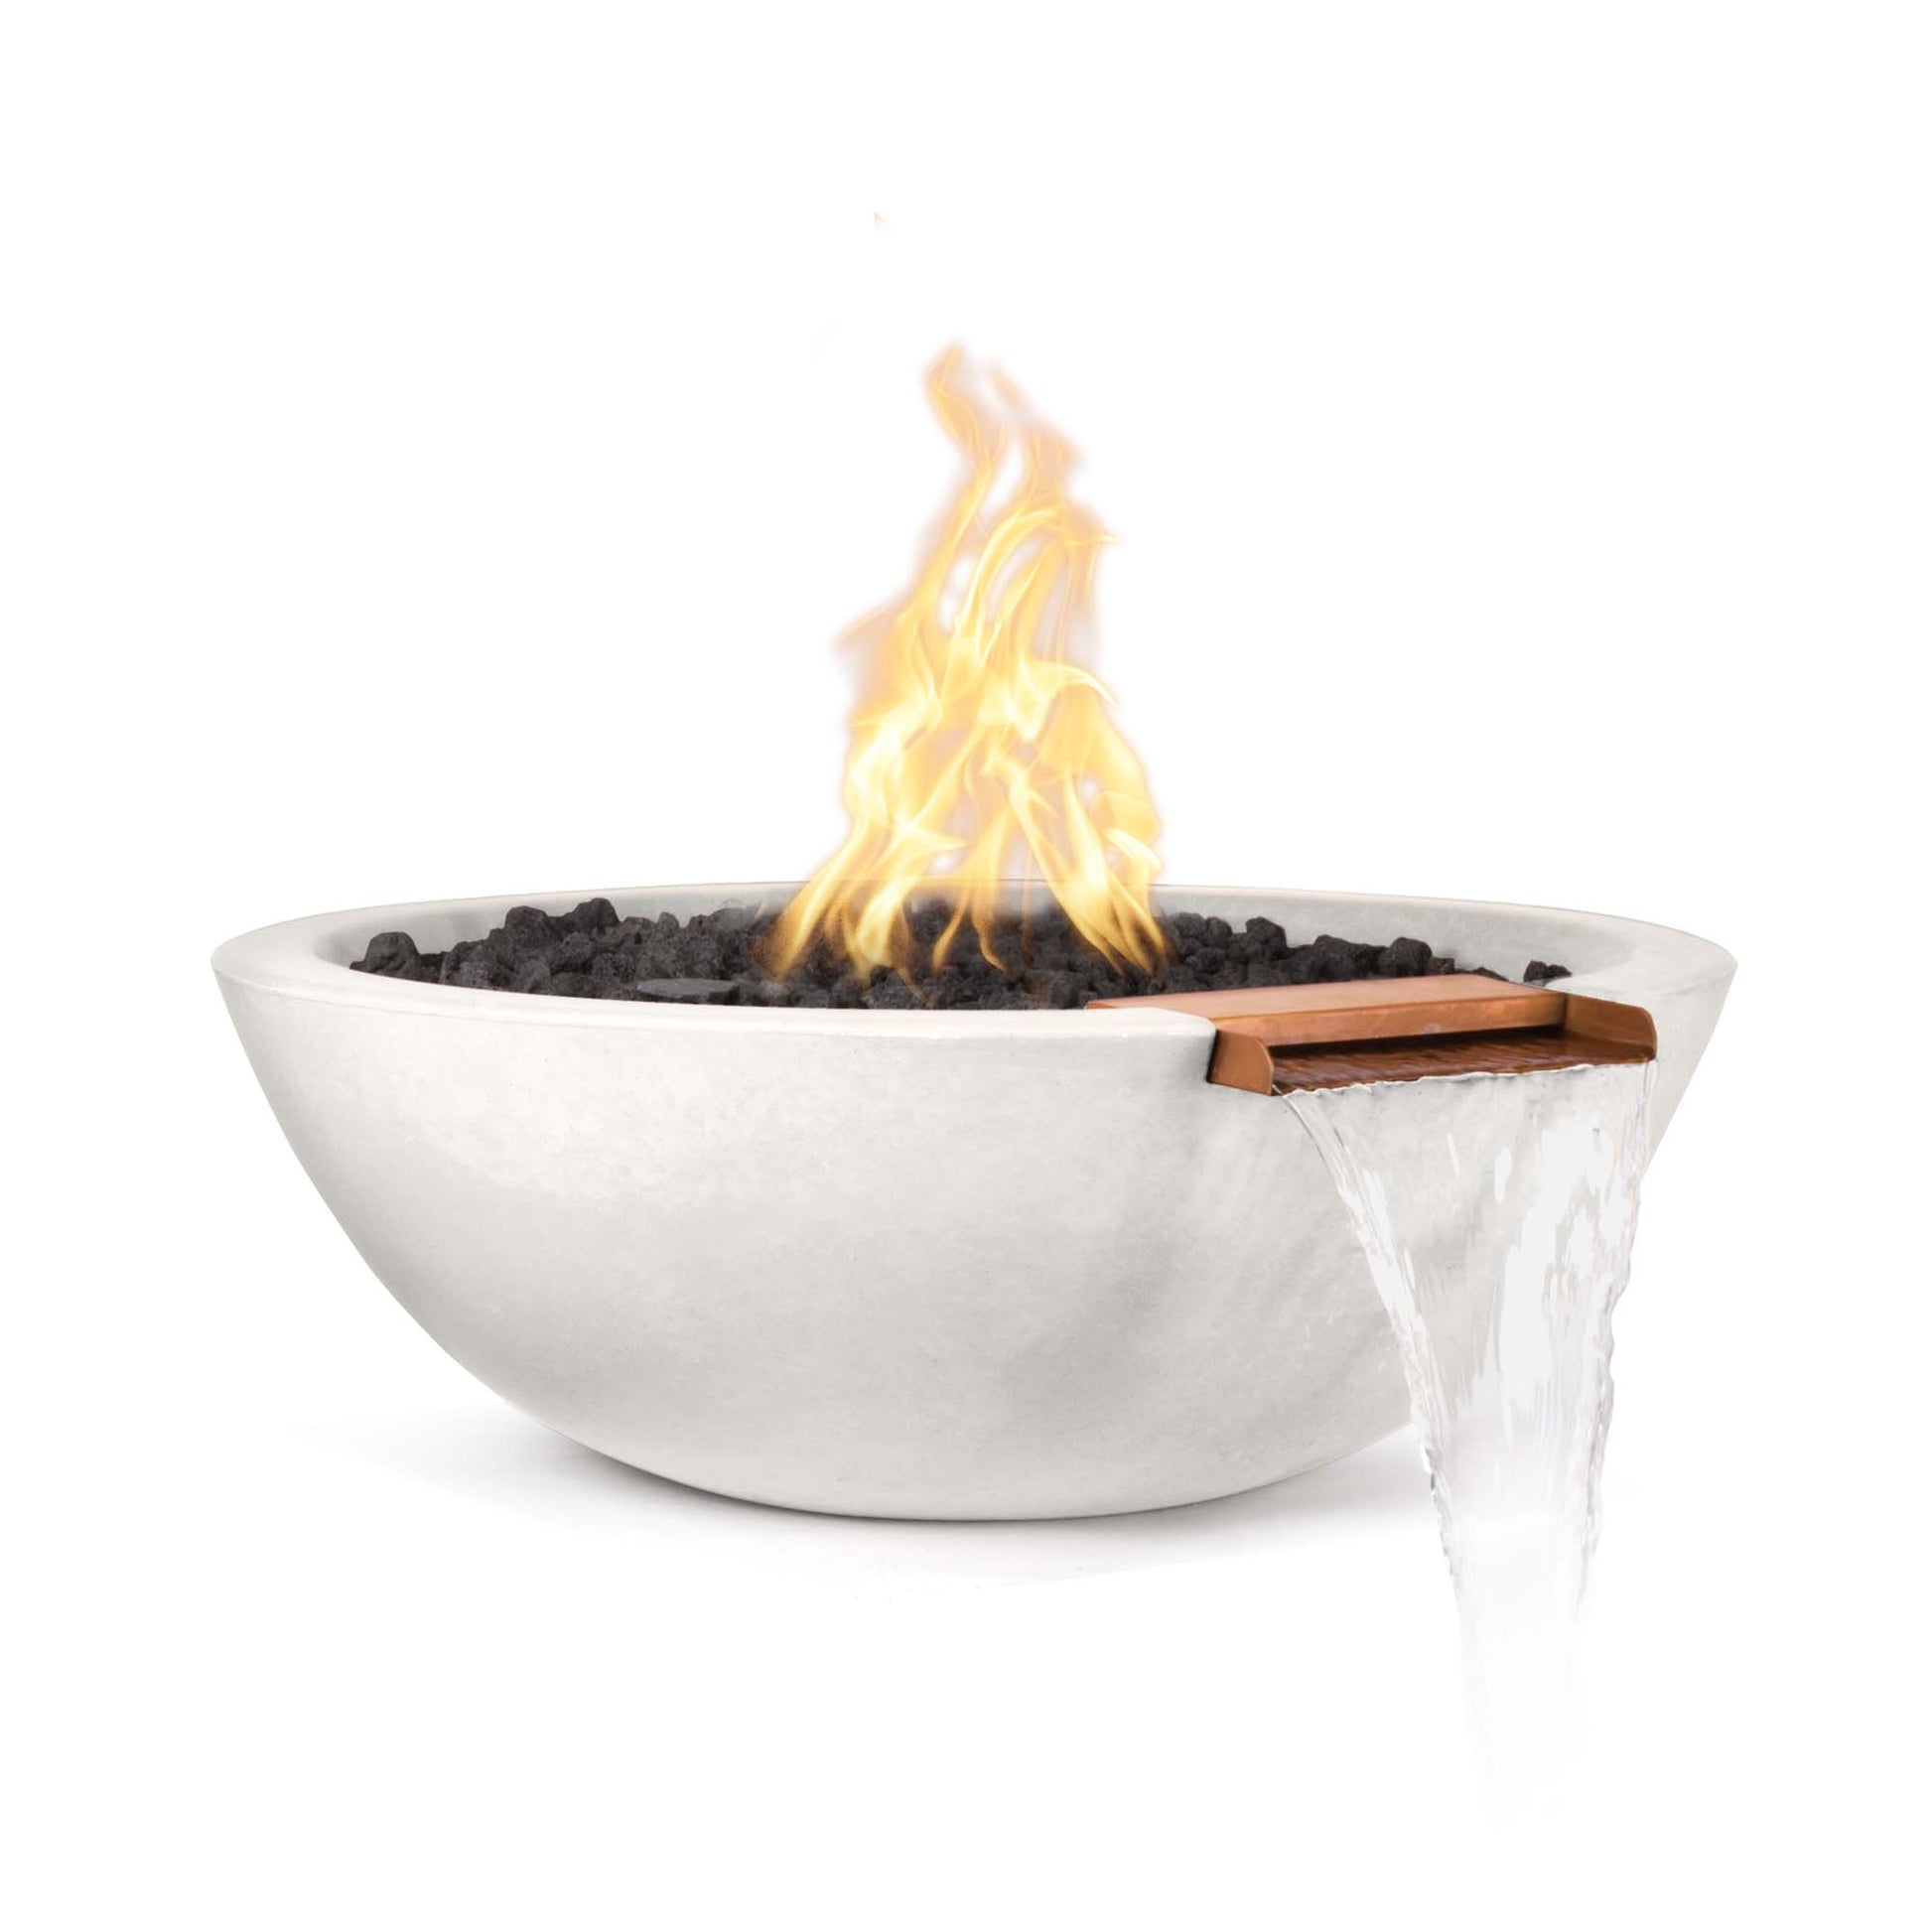 The Outdoor Plus Round Sedona 33" Chocolate GFRC Concrete Liquid Propane Fire & Water Bowl with Match Lit with Flame Sense Ignition